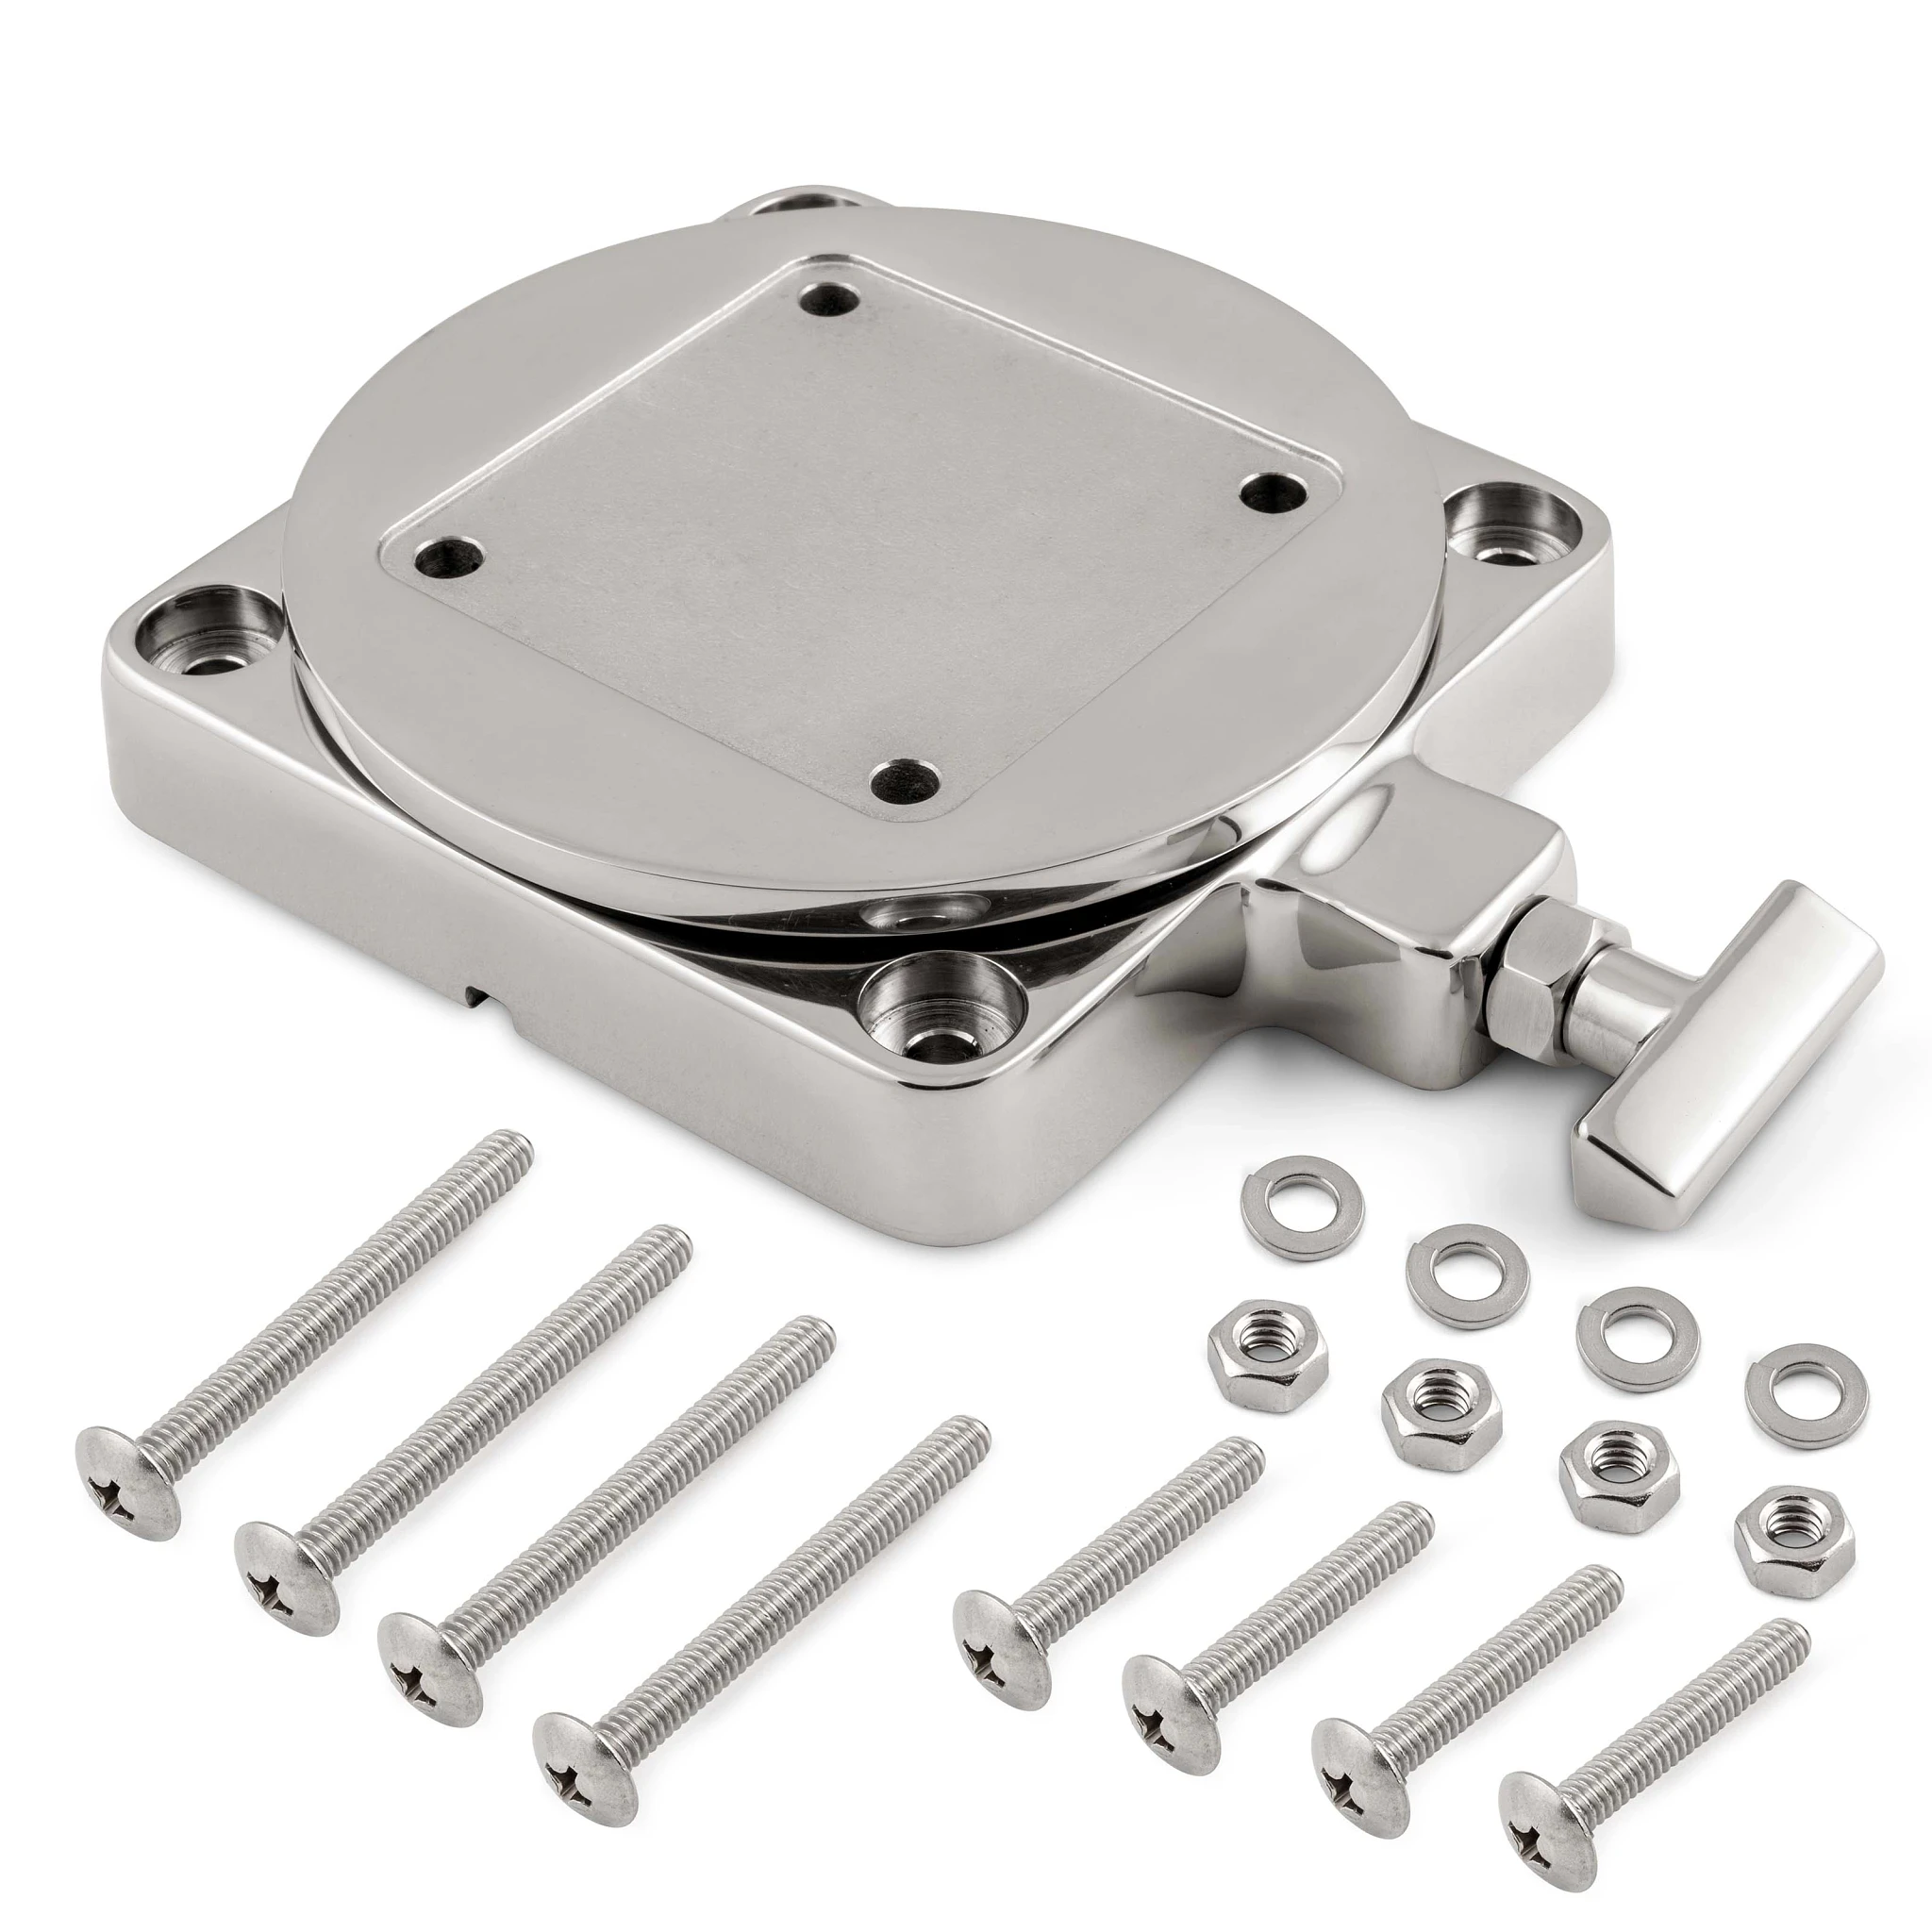 Stainless steel swivel base with eight screws, four nuts, and four washers